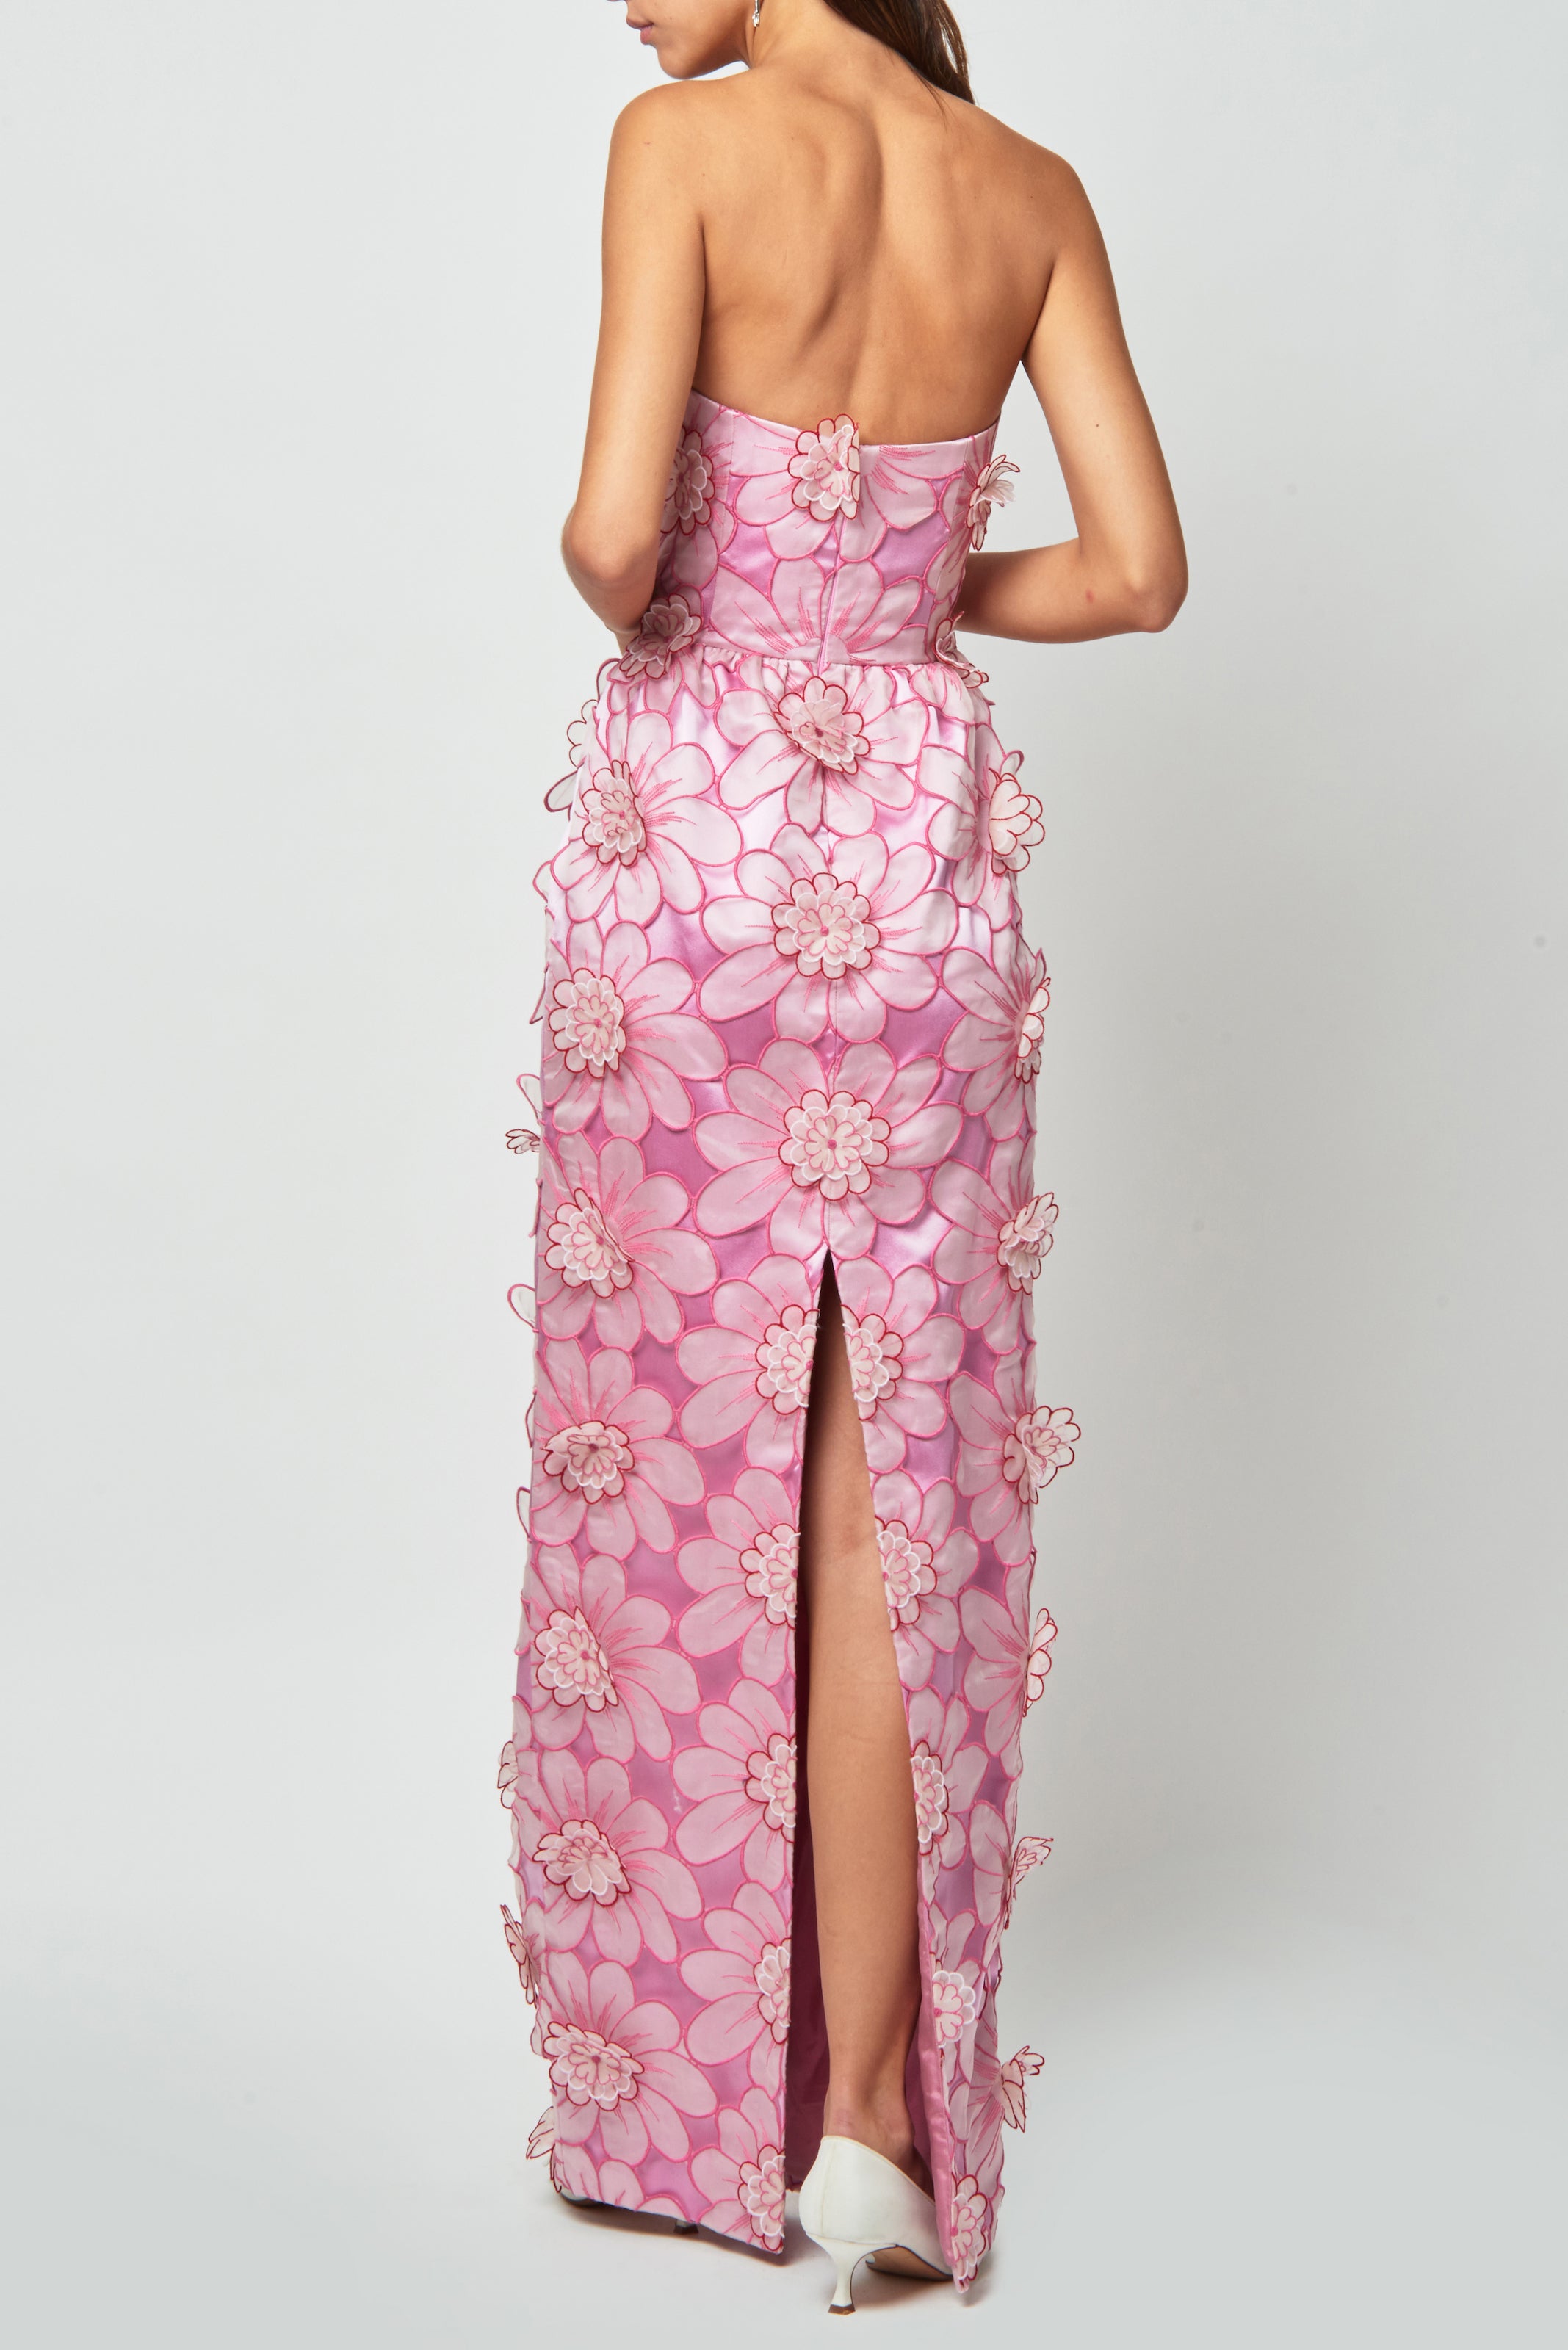 Marina Pink Floral Applique Gown